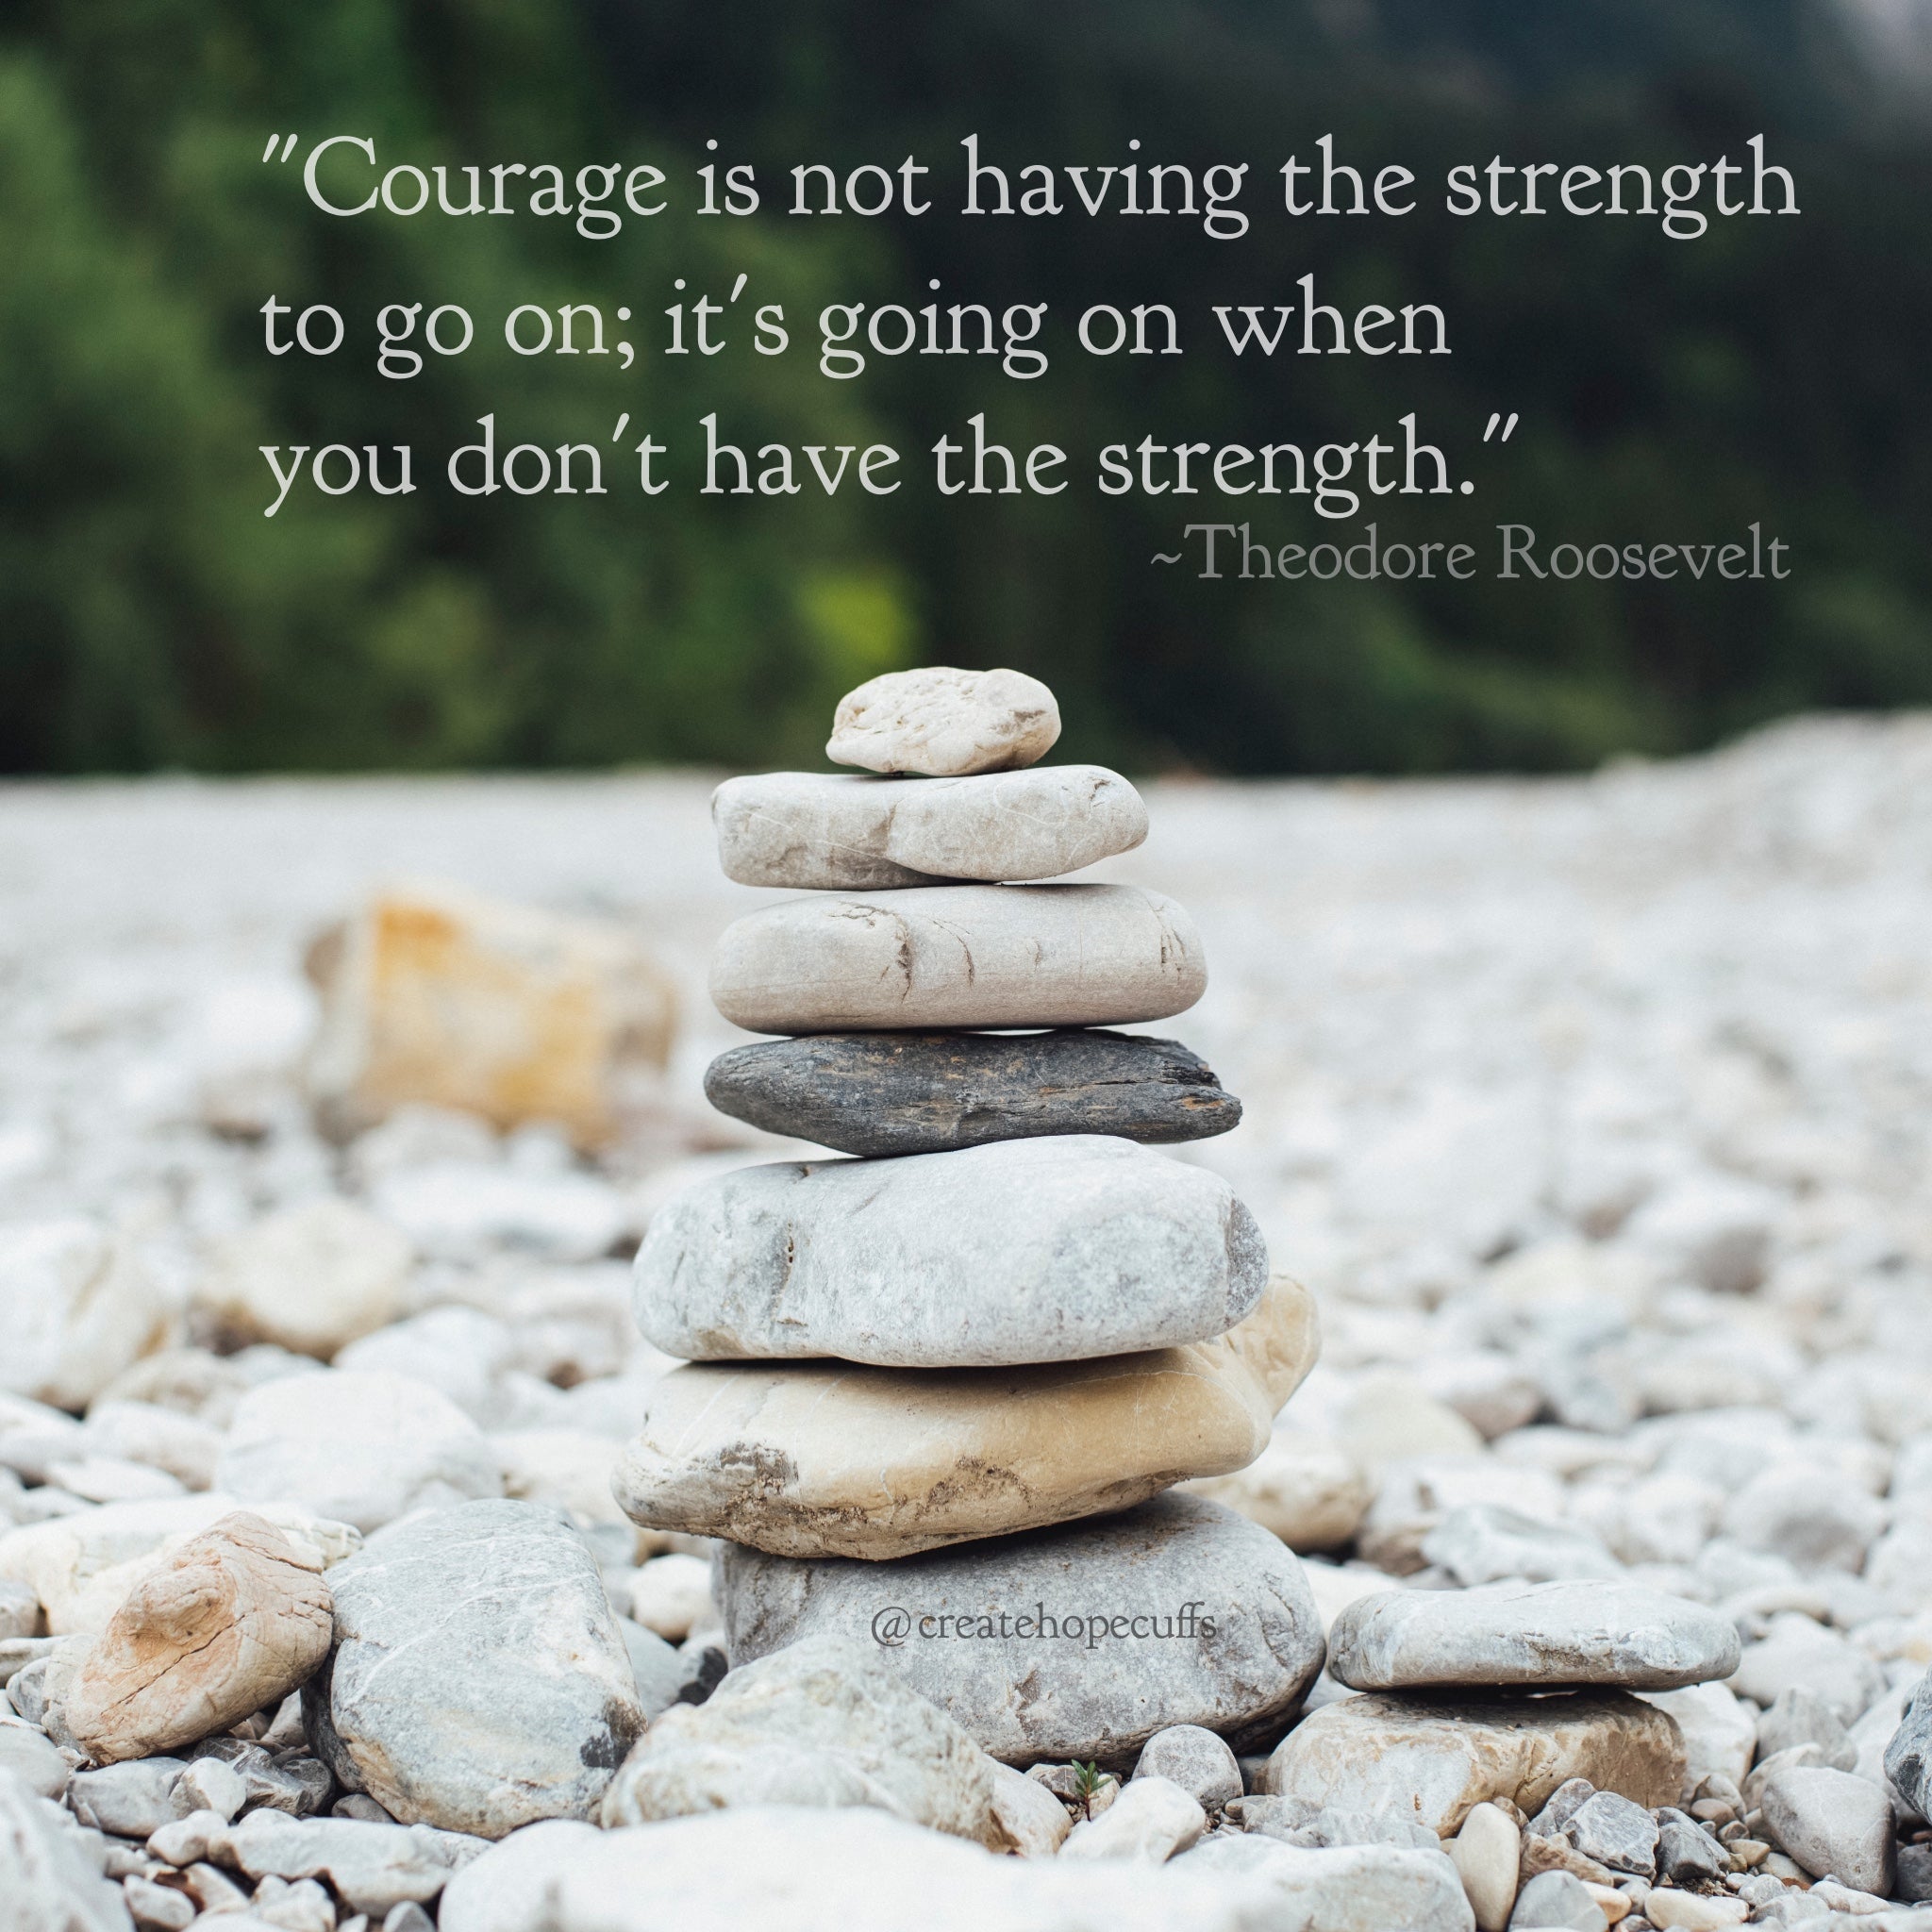 Finding Your Moment of Courage